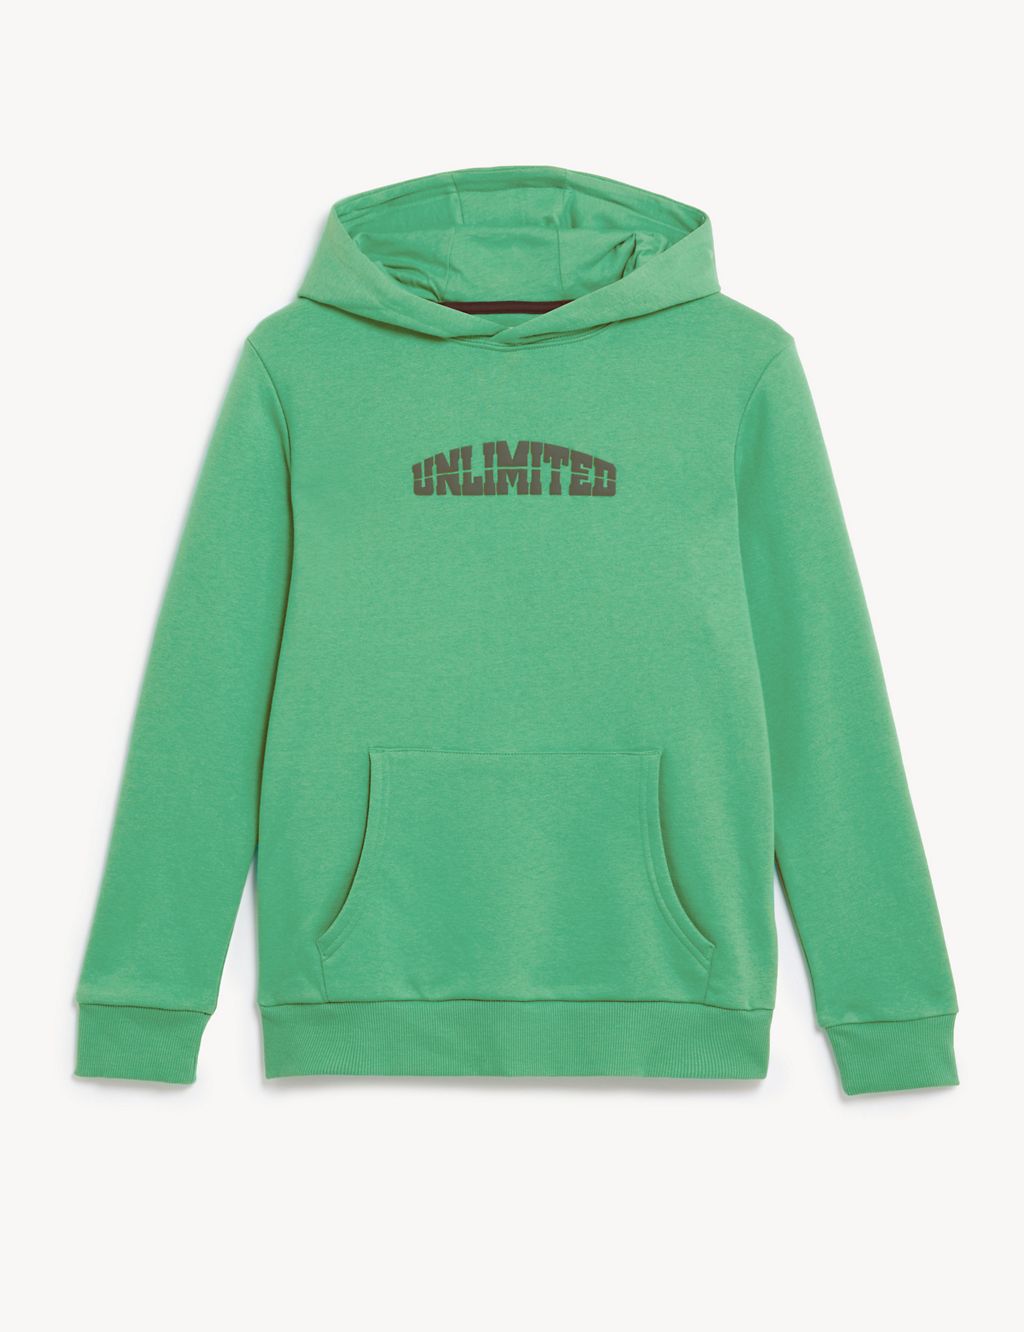 Cotton Rich Unlimited Slogan Hoodie (6-16 Yrs) | M&S Collection | M&S